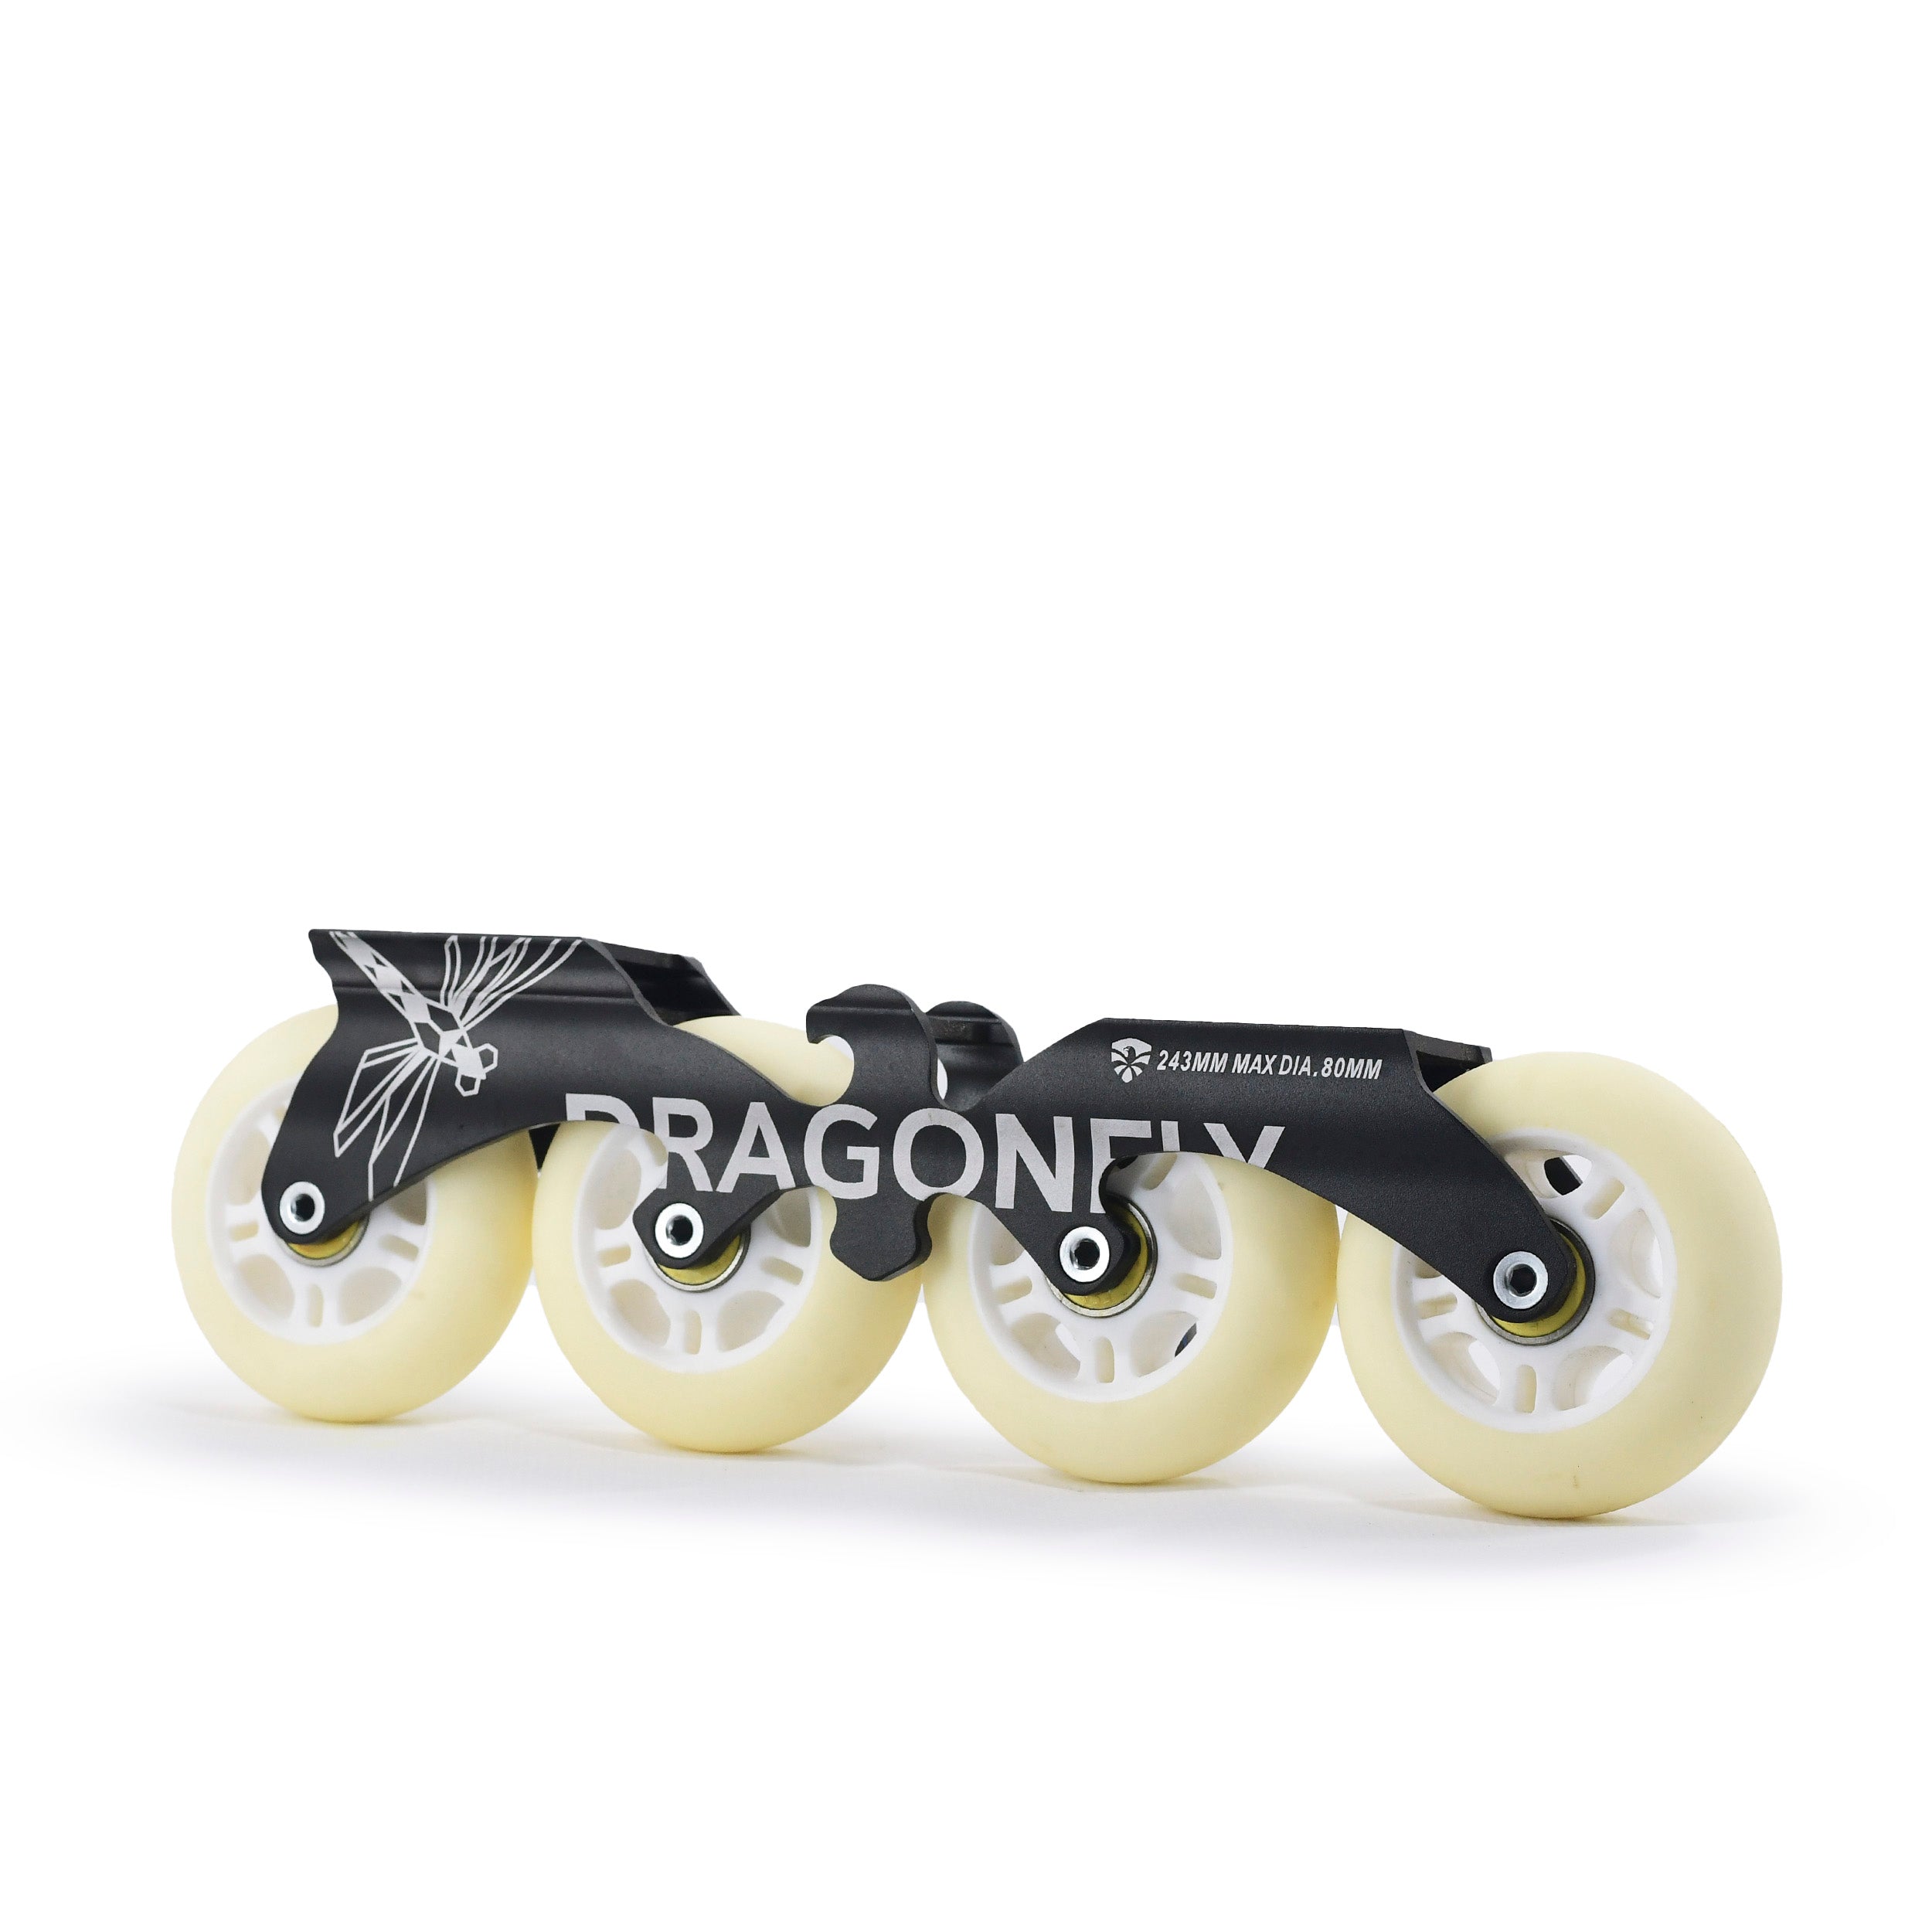 Flying Eagle Dragon Fly base with HD Inline 80mm Abec11 wheels